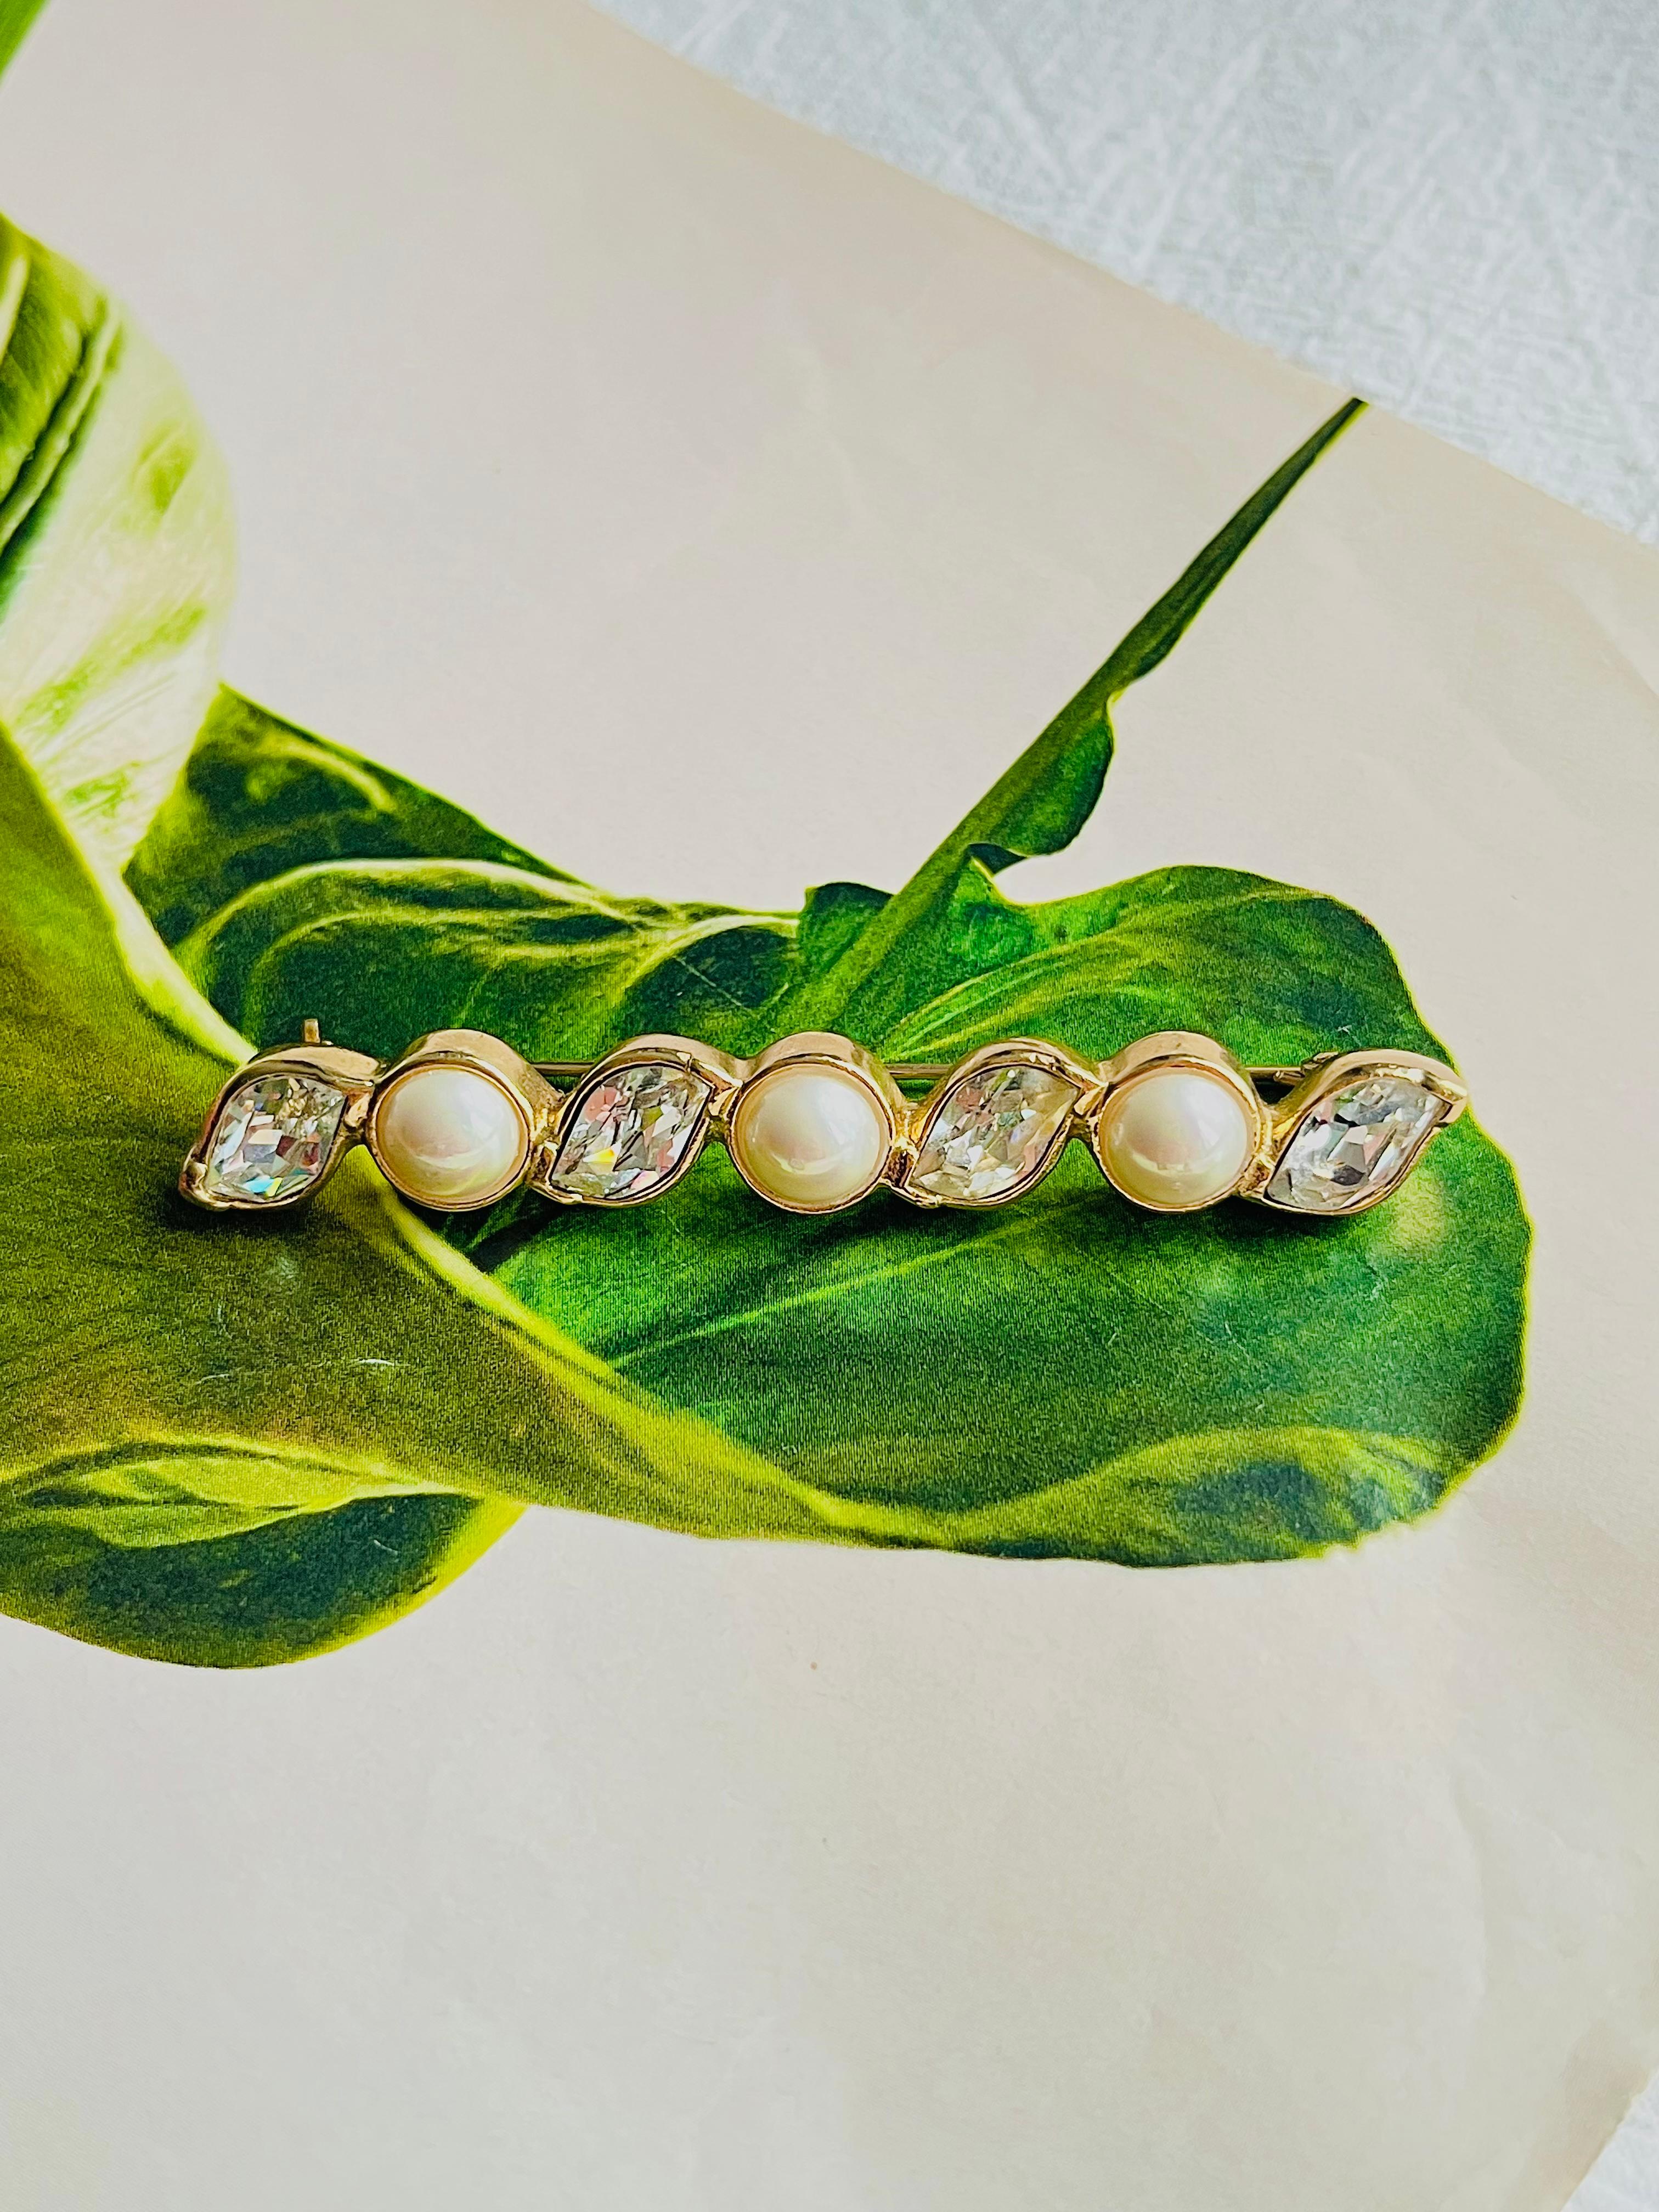 Christian Dior Vintage 1980s Long Bar Leaf Shining Crystals White Pearls Brooch, Gold Tone

Renowned for its timeless elegant designs, Christian Dior presents this brooch. Crafted from polished gold plated brass, the piece is adorned with dazzling